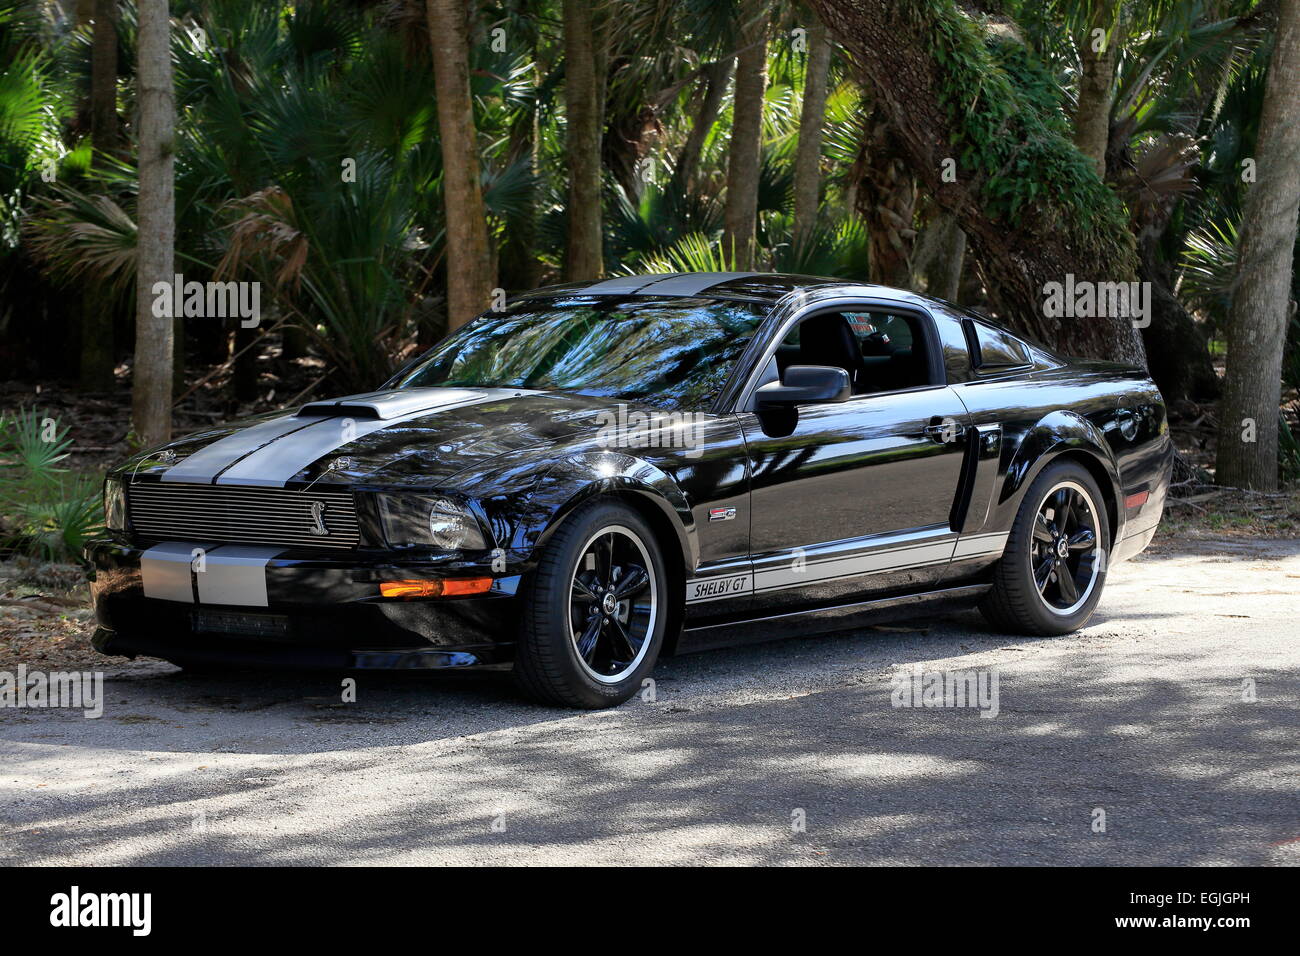 A 2007 model Shelby GT Ford Mustang automobile Stock Photo